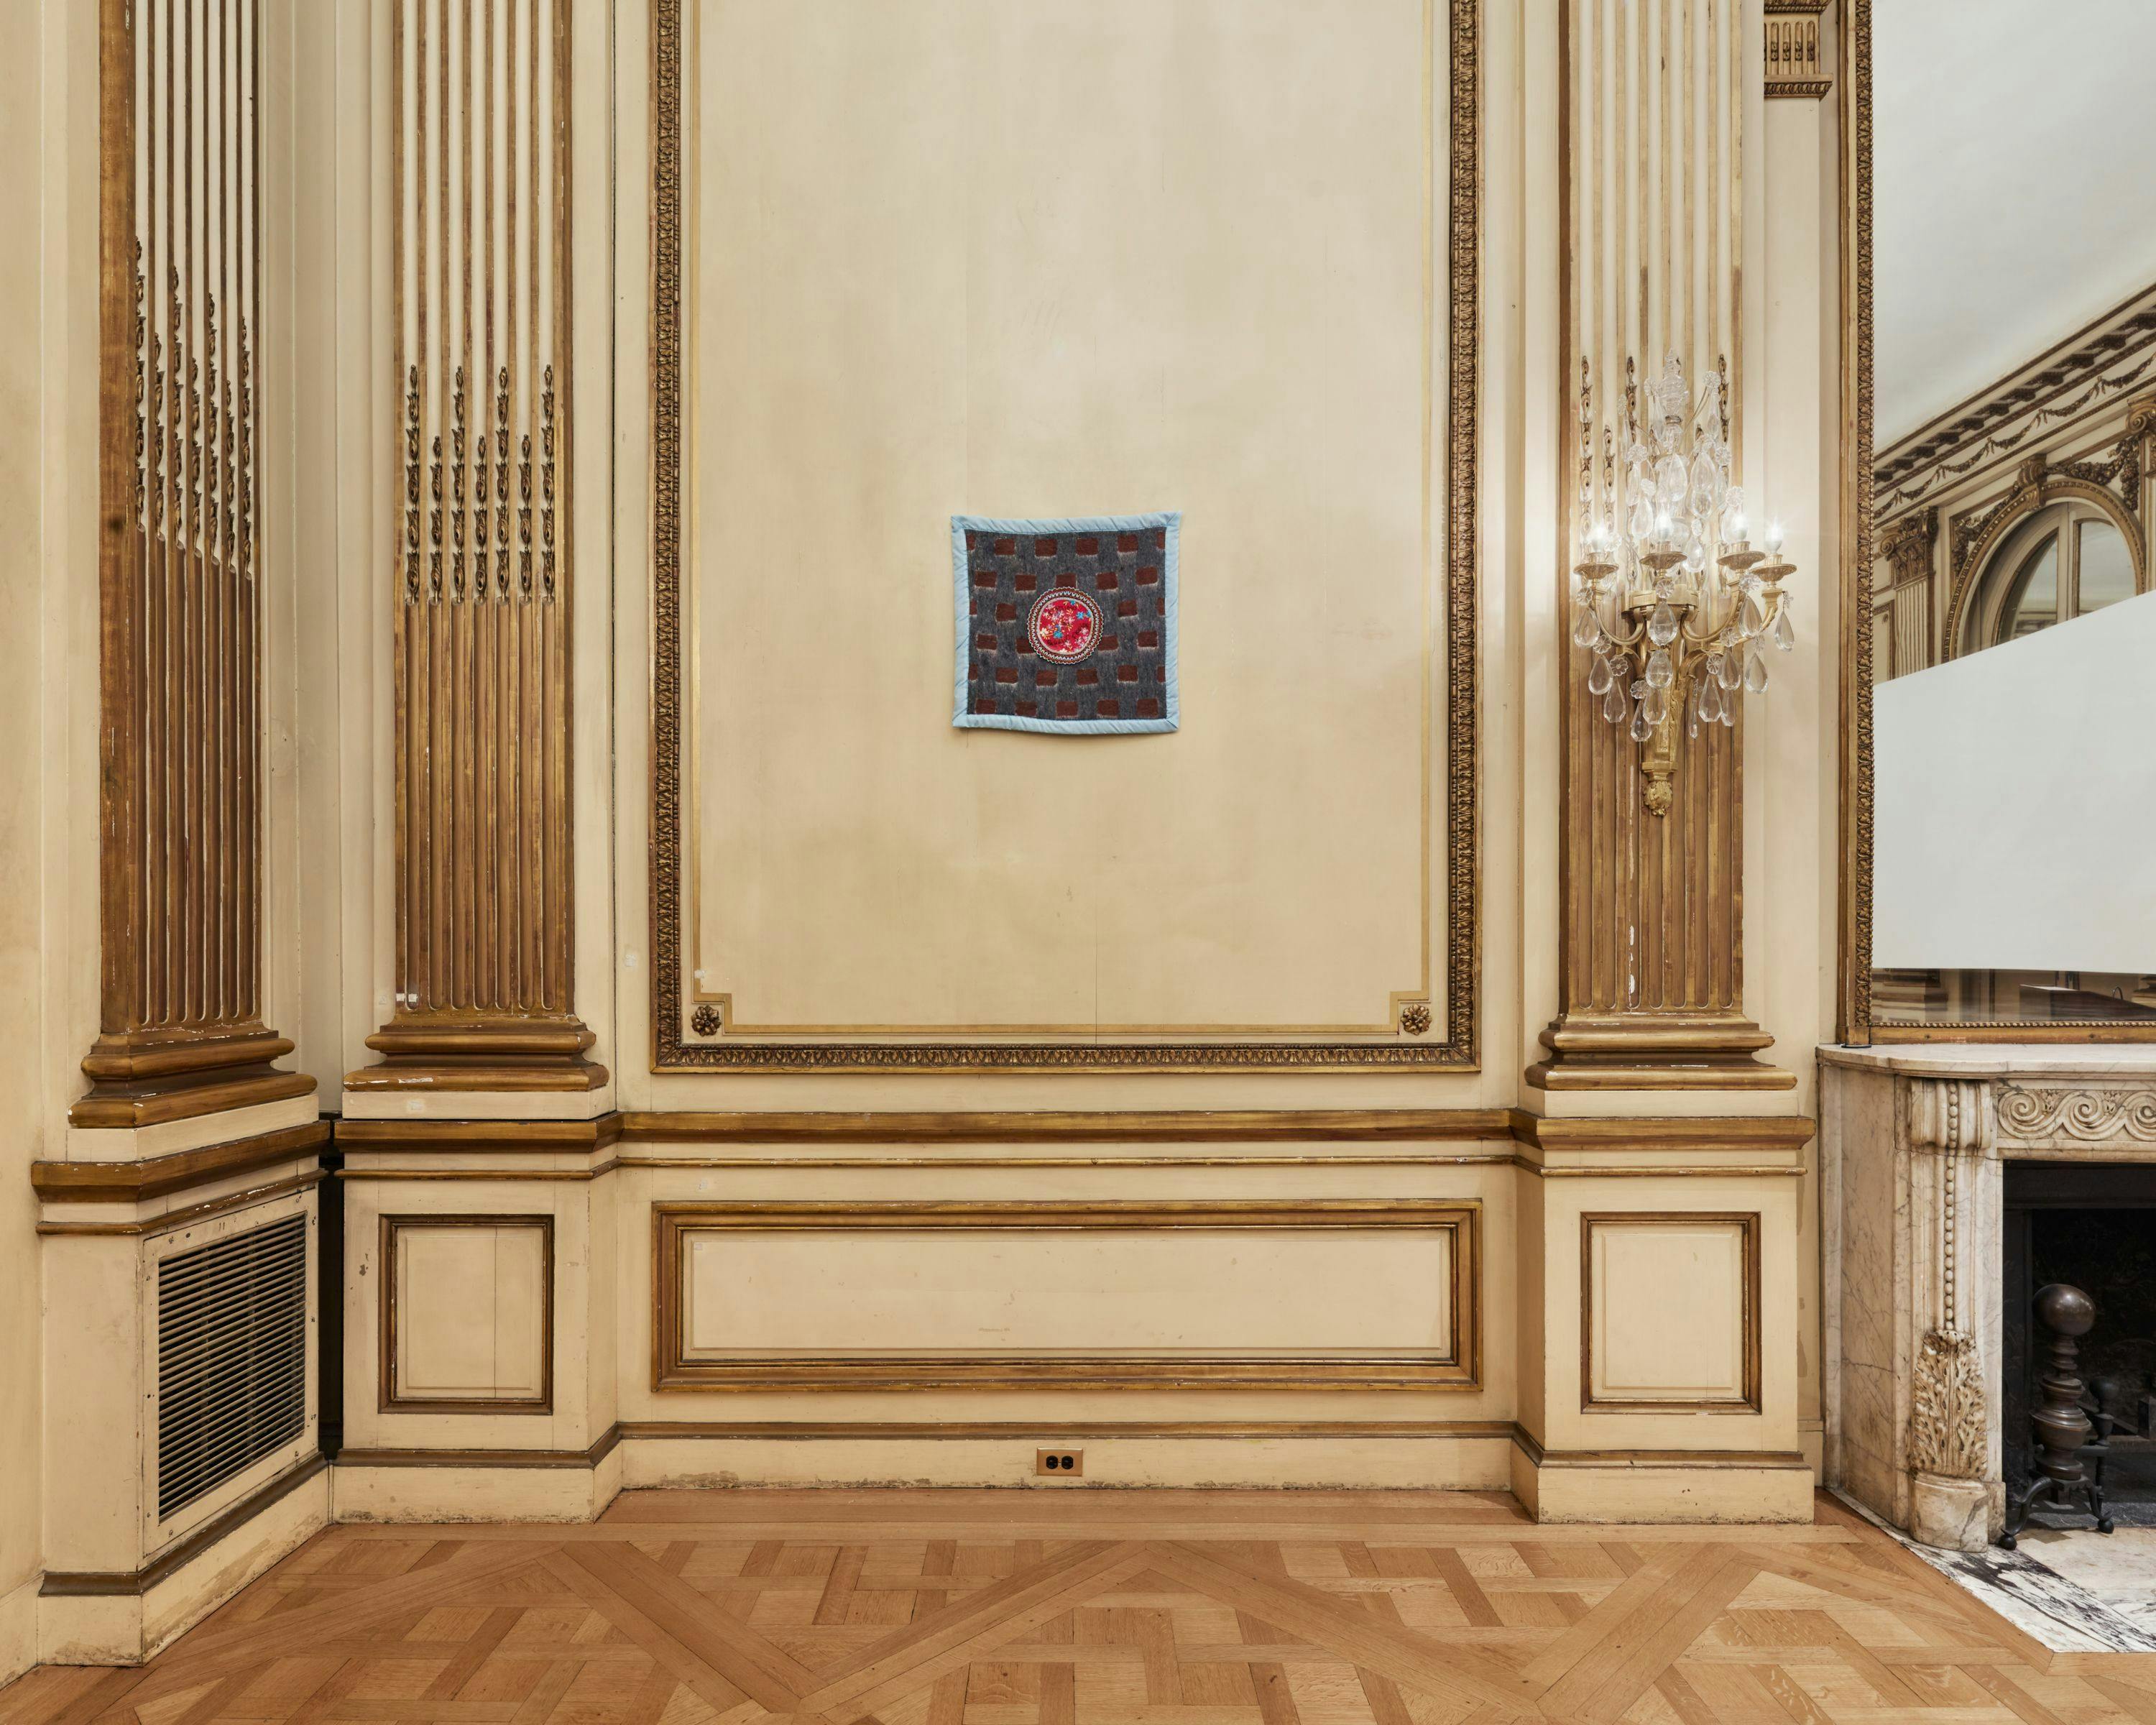 Installation view of the exhibition with artwork on the wall framed by wall moldings